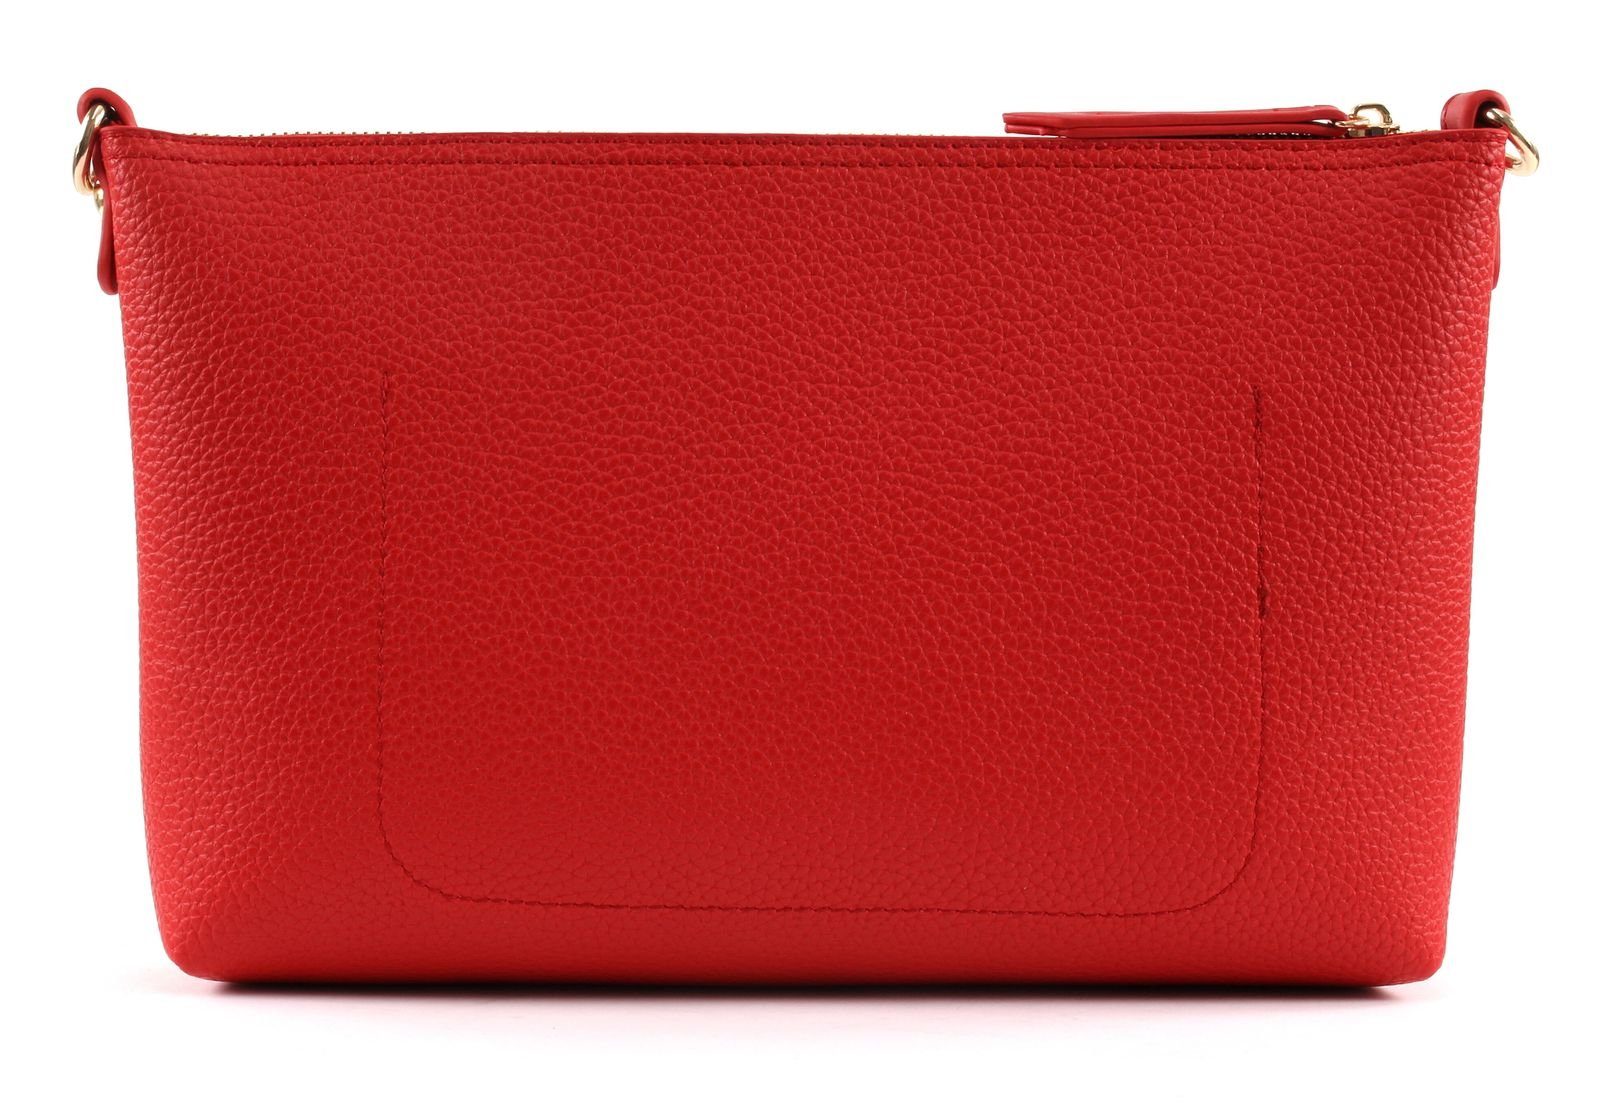 VALENTINO BAGS Rosso Superman Clutch